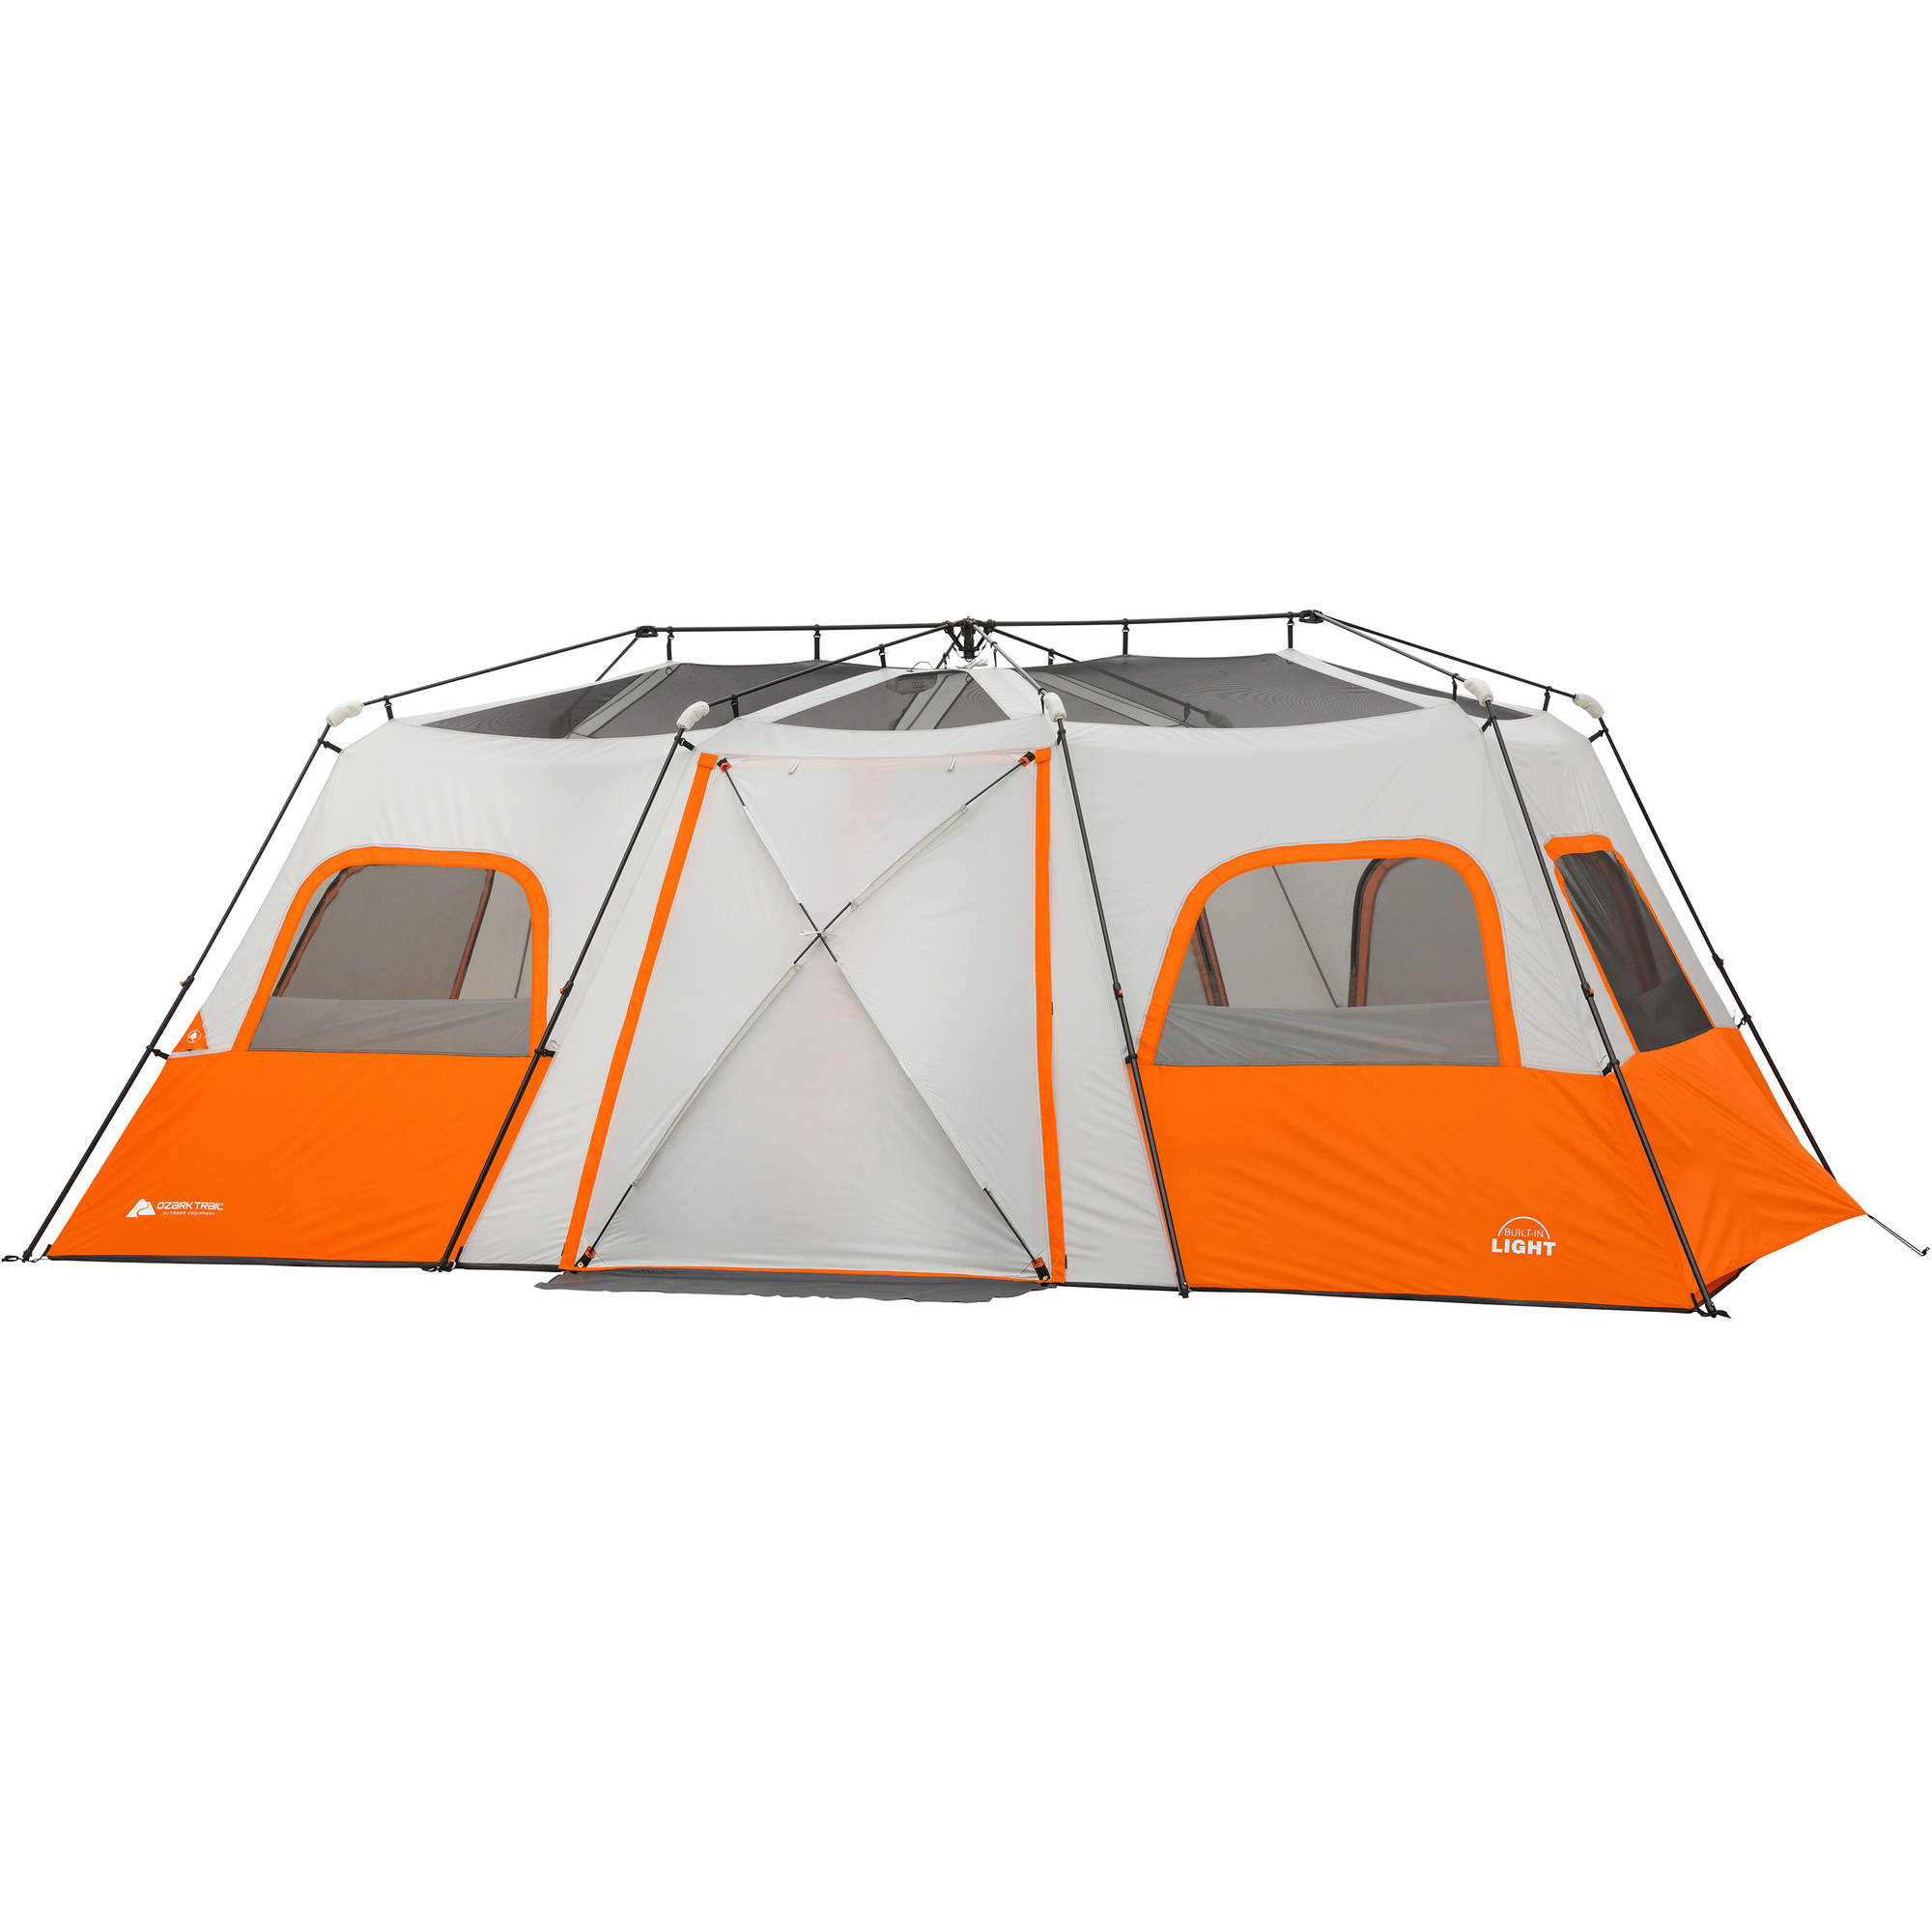 Ozark Trail 12 Person Instant Cabin Tent with Integrated LED Lights, 3 Rooms, 47.87 lbs - image 3 of 17